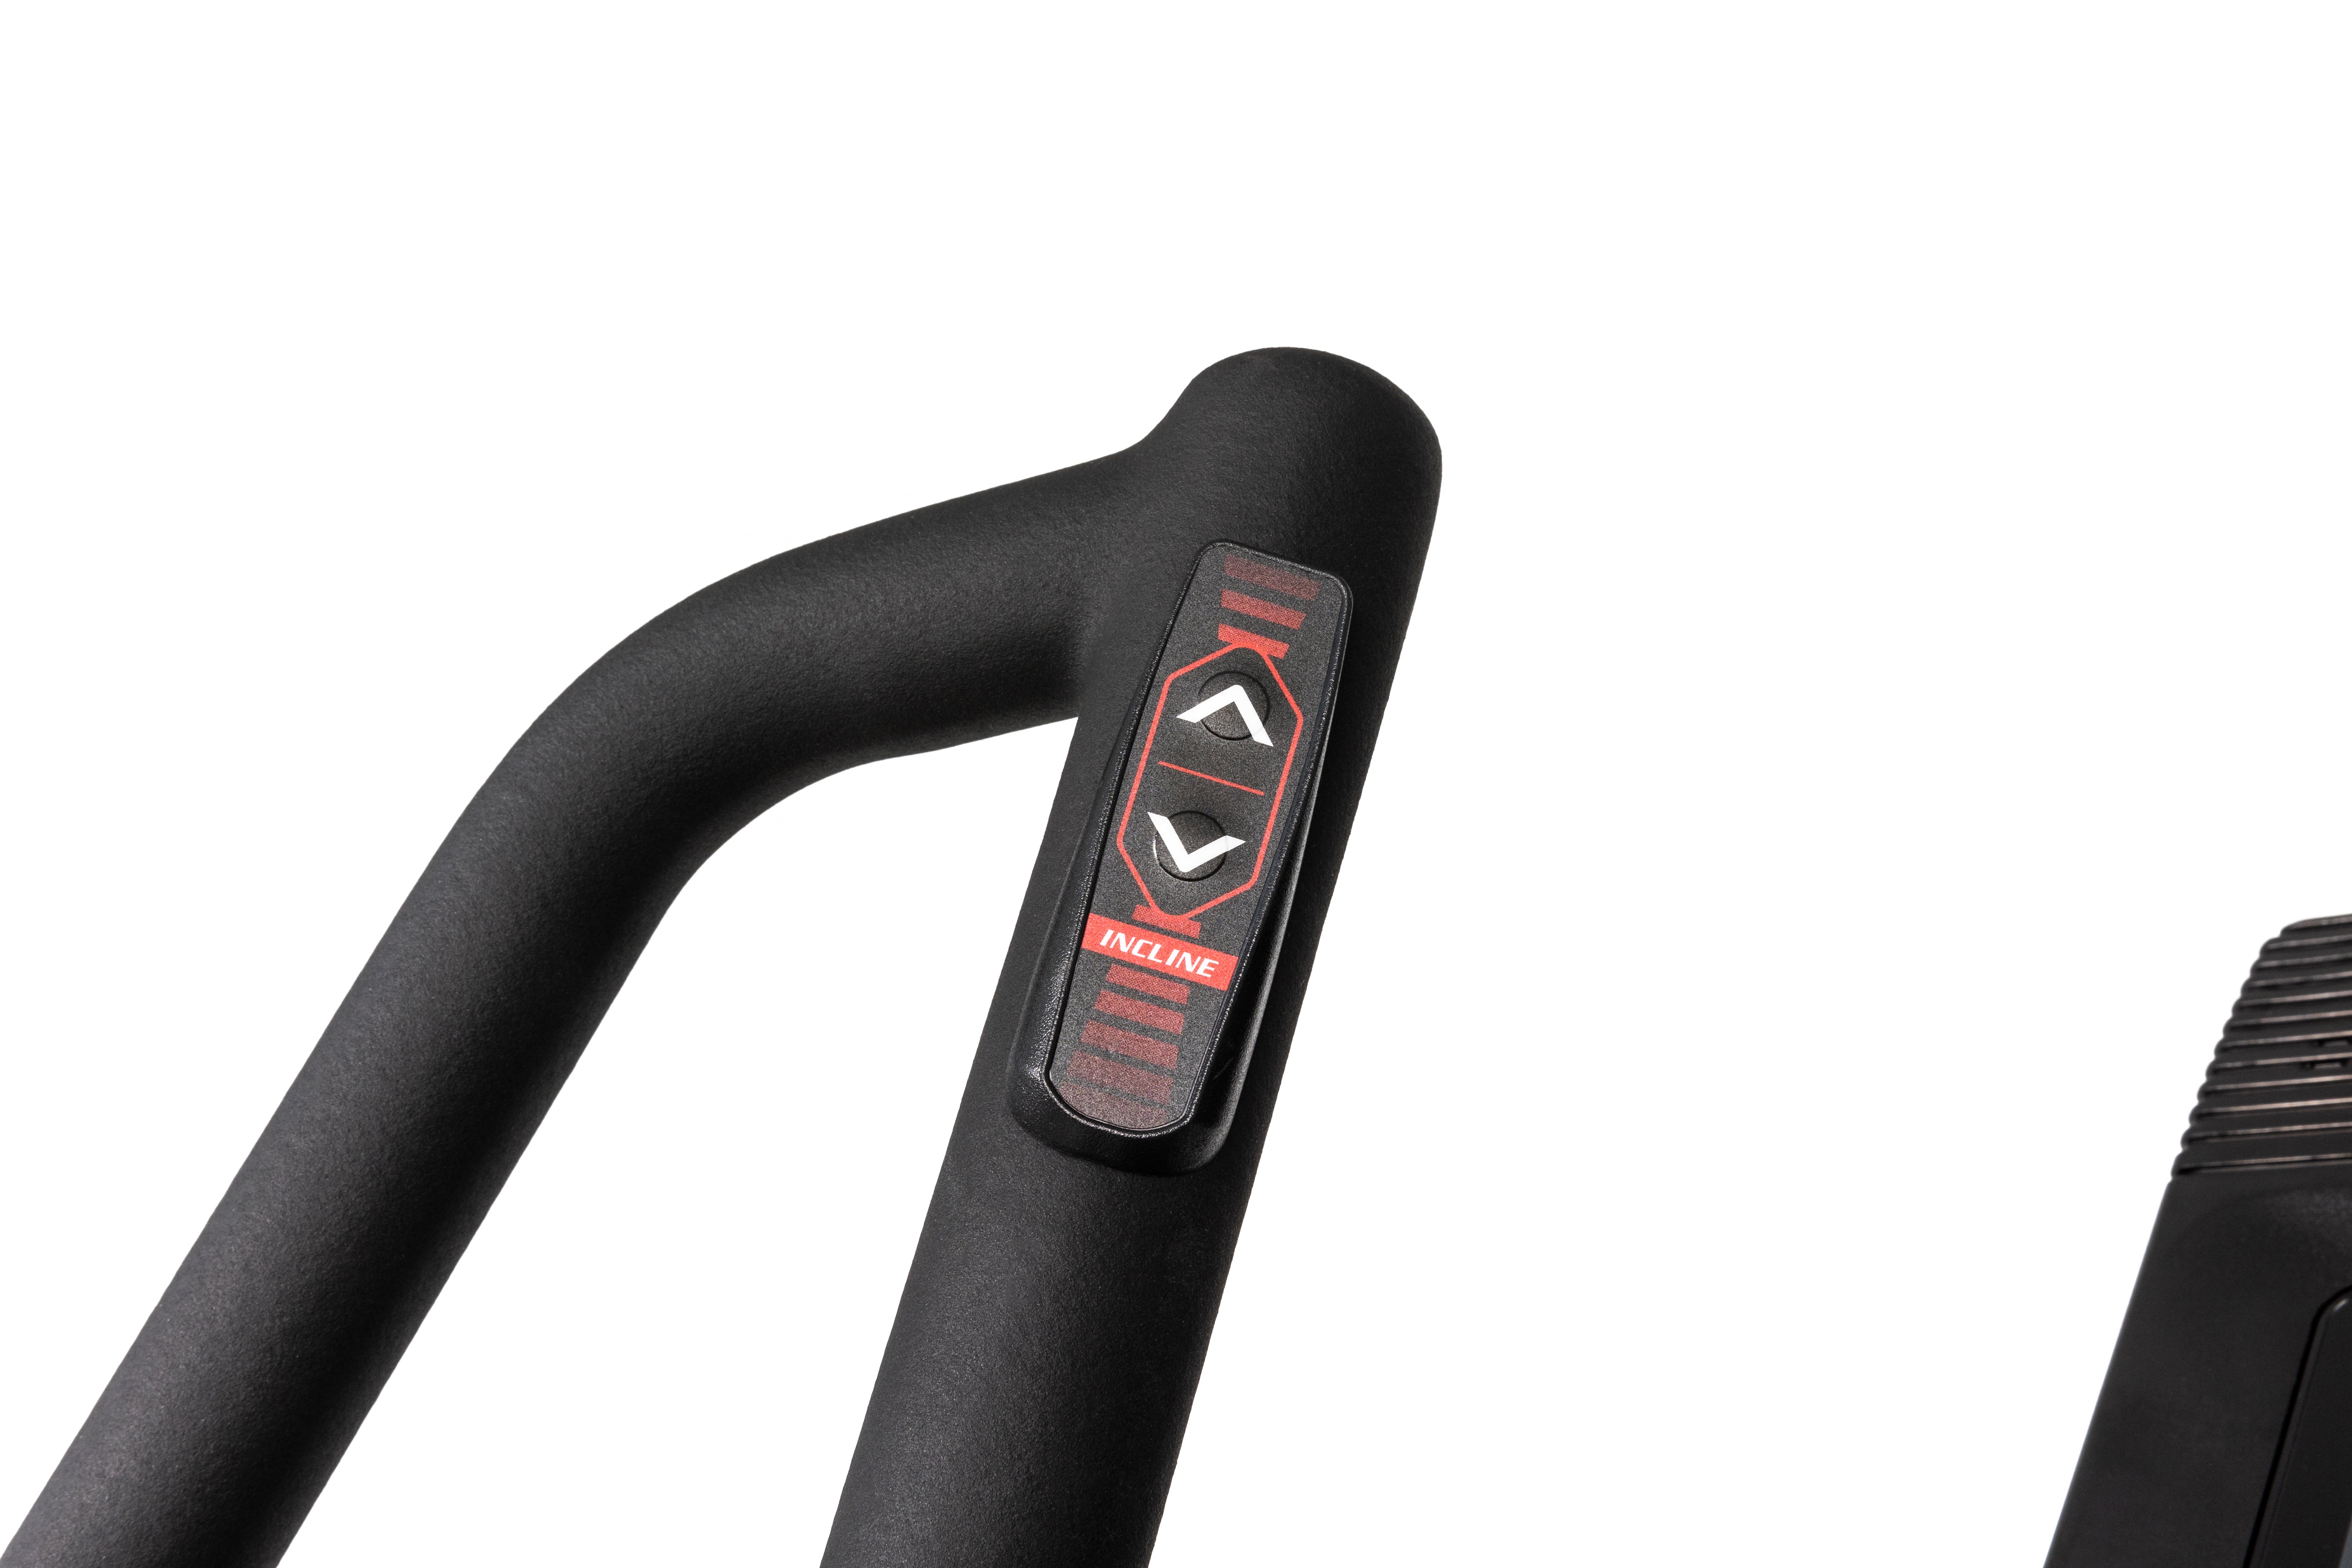 Close-up view of the Sole E95 elliptical trainer's handlebar, focusing on the 'INCLINE' control buttons. The button panel is red with white arrow symbols pointing up and down, indicating adjustments for incline. The handlebar is matte black with a smooth finish.